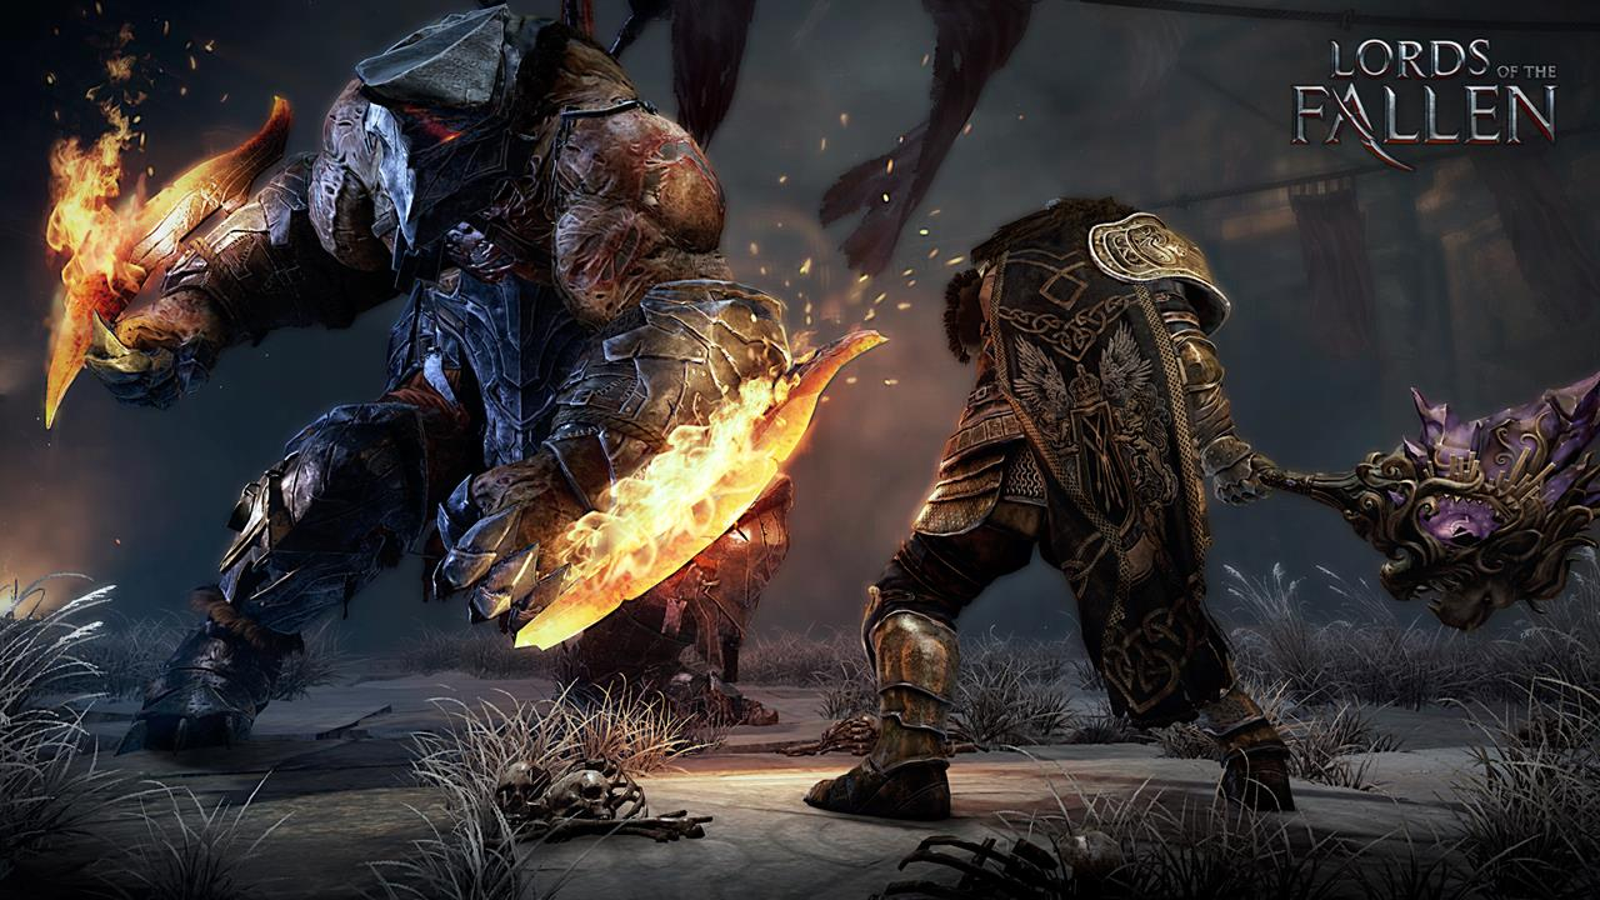 Lords of the Fallen - Official Overview Trailer - IGN